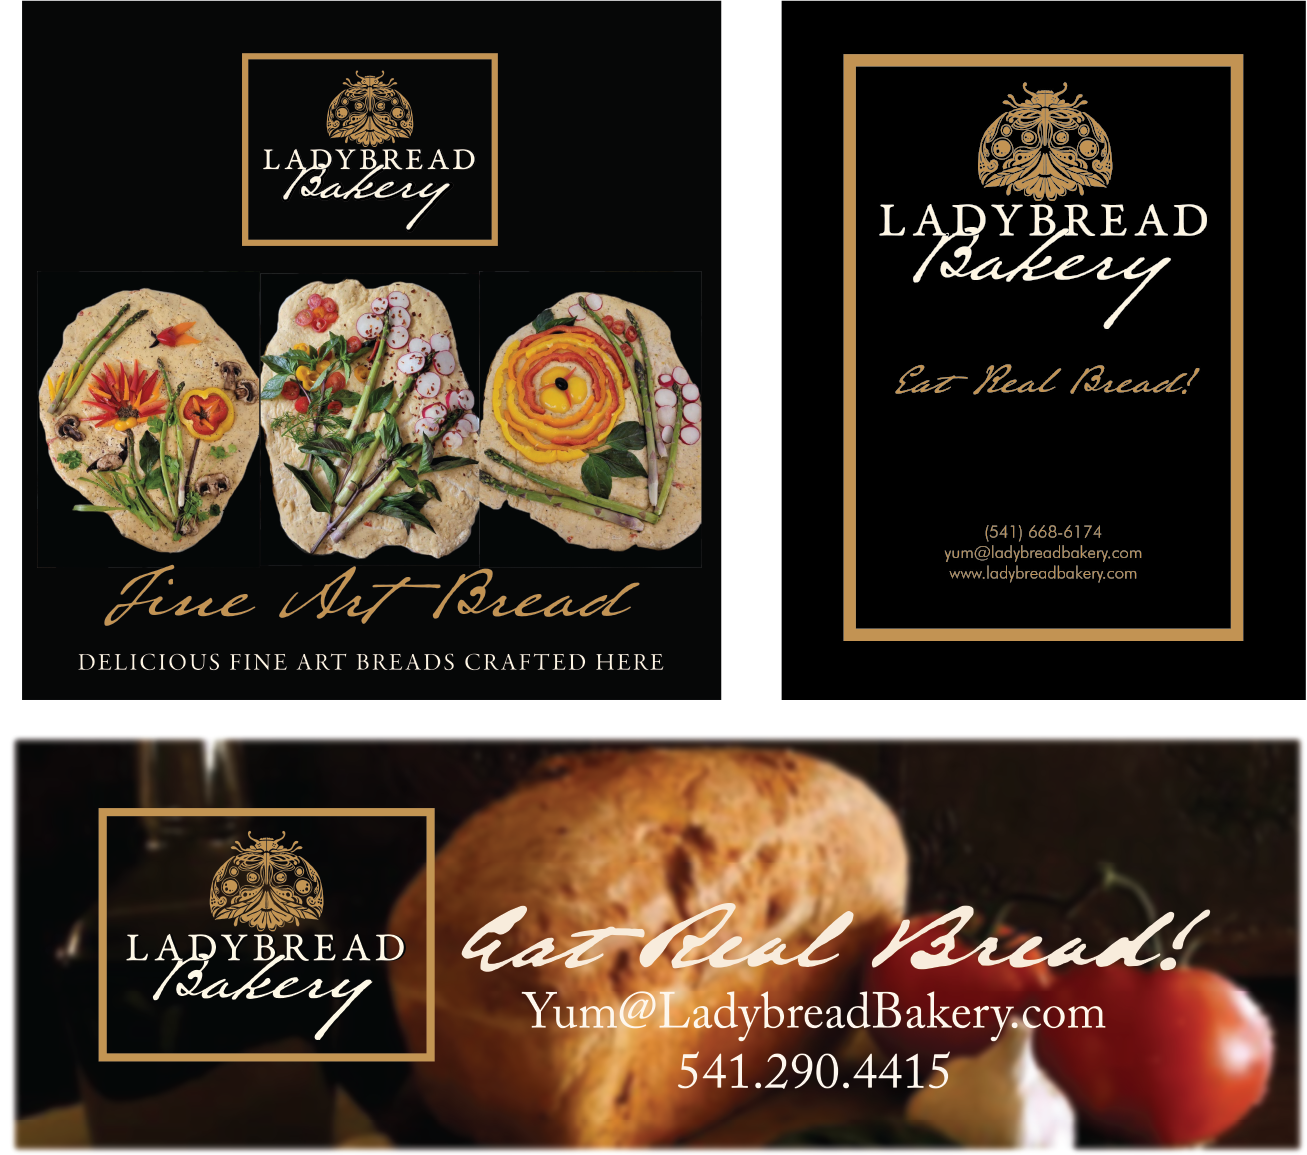 Ladybread Bakery signs and banners